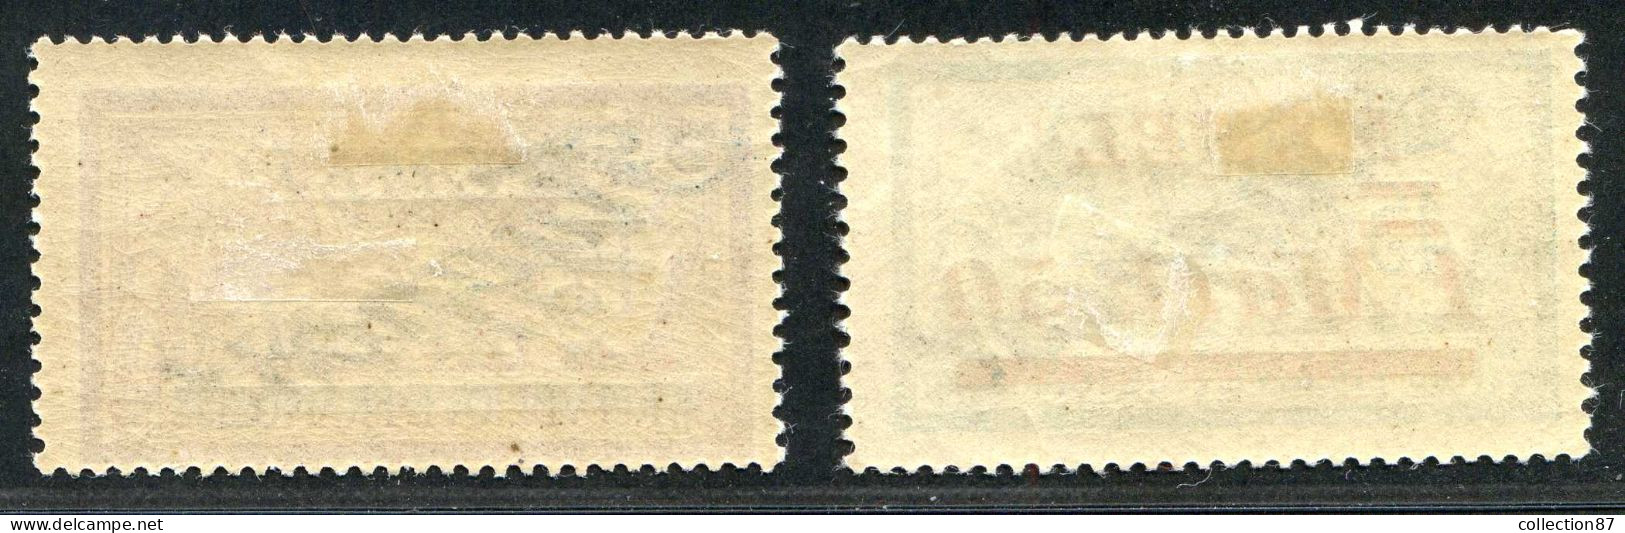 REF 088 > MEMEL FLUGPOST < PA N° 12 + 13 * Neuf Ch Dos Visible - MH * > Air Mail - Aéro - Nuovi